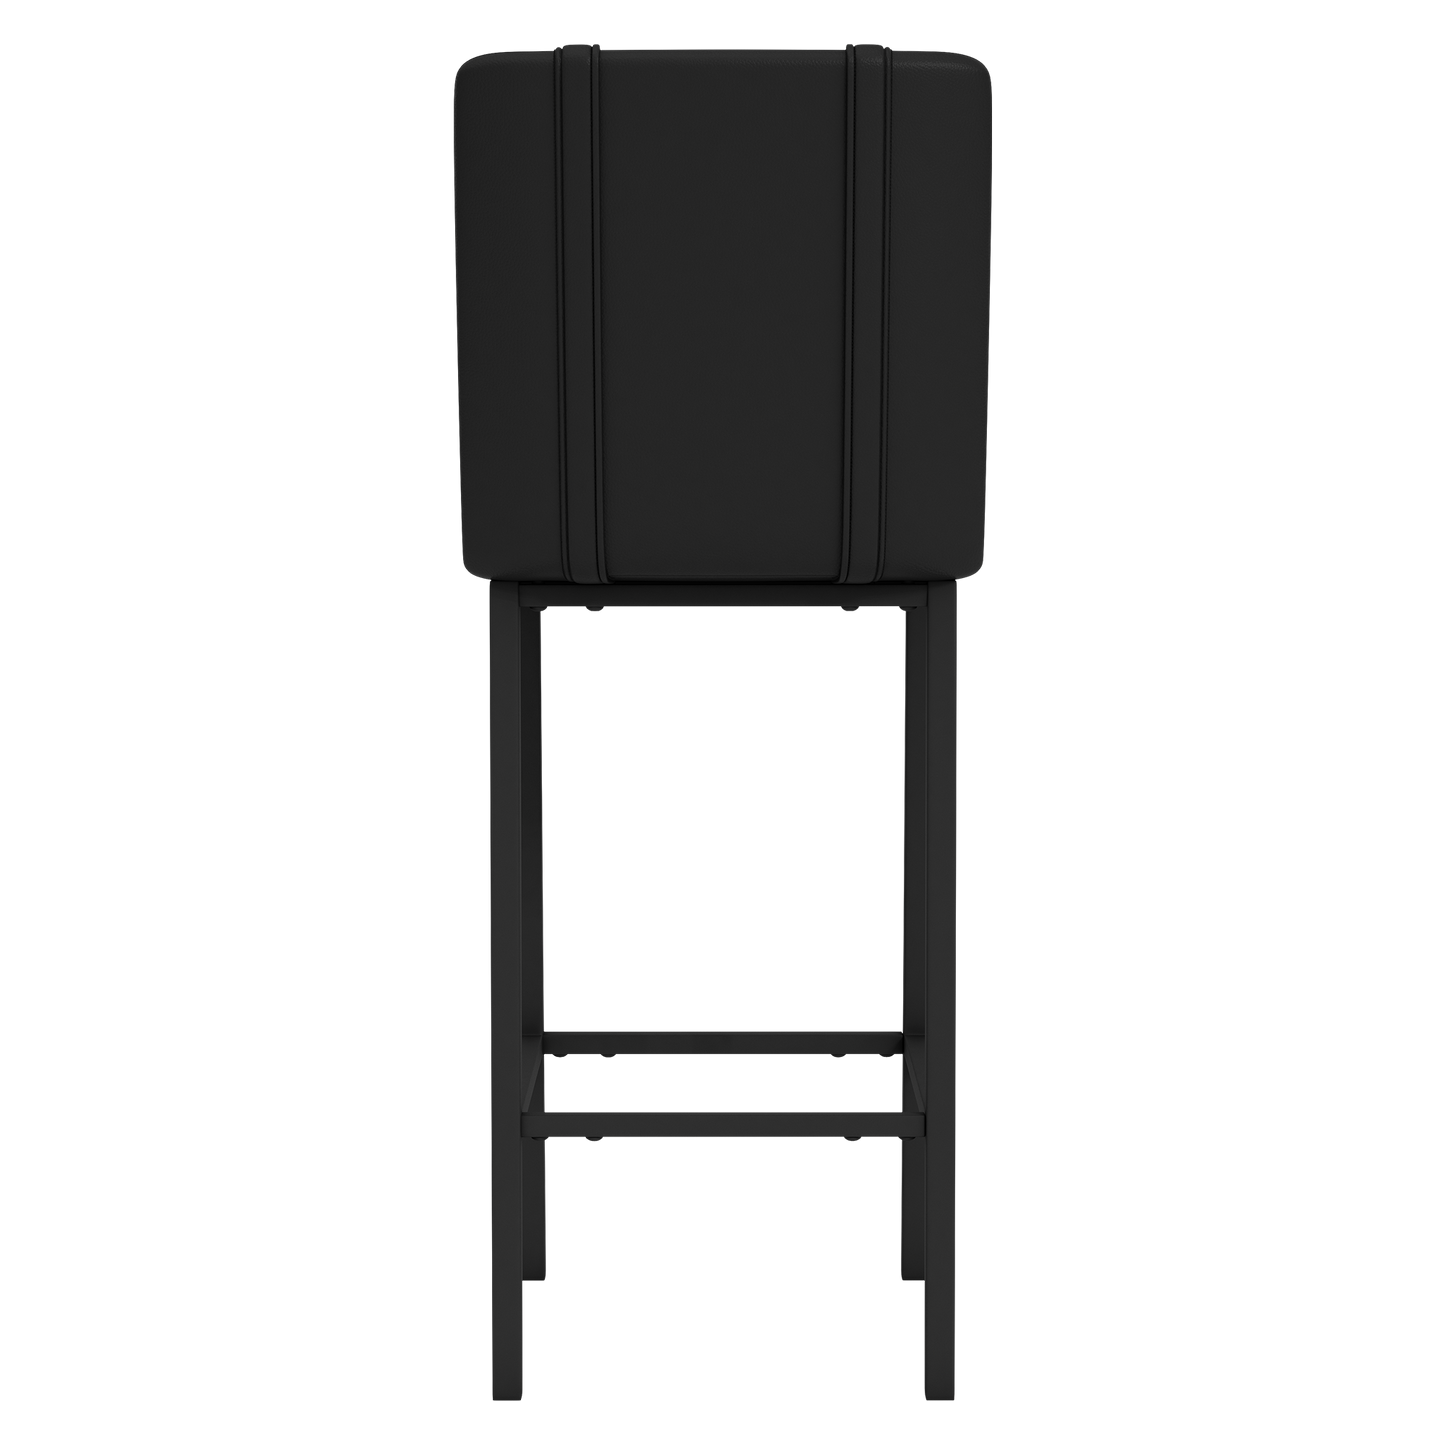 Bar Stool 500 with Philadelphia 76ers GC All White [CAN ONLY BE SHIPPED TO PENNSYLVANIA] Set of 2